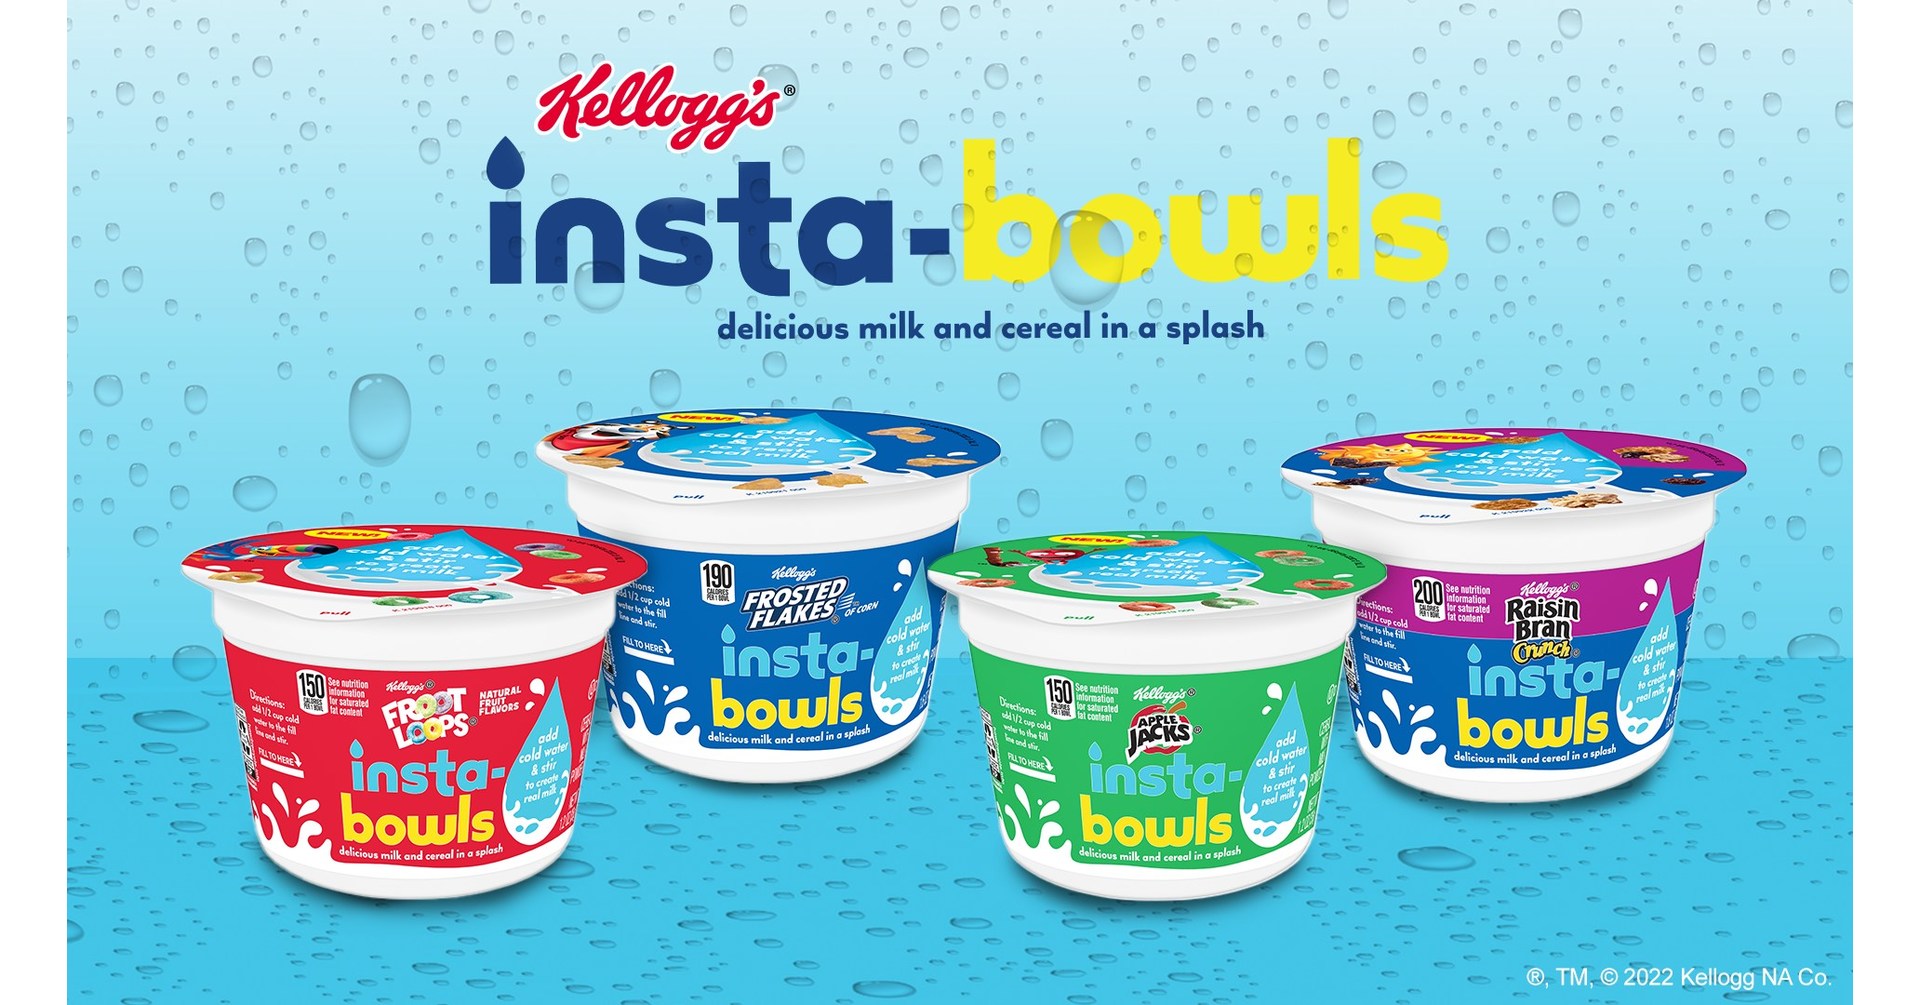 NO MILK? NO PROBLEM. JUST ADD WATER TO NEW KELLOGG'S® INSTABOWLS FOR REAL MILK  IN THIS FIRST-EVER CEREAL INNOVATION FROM KELLOGG'S